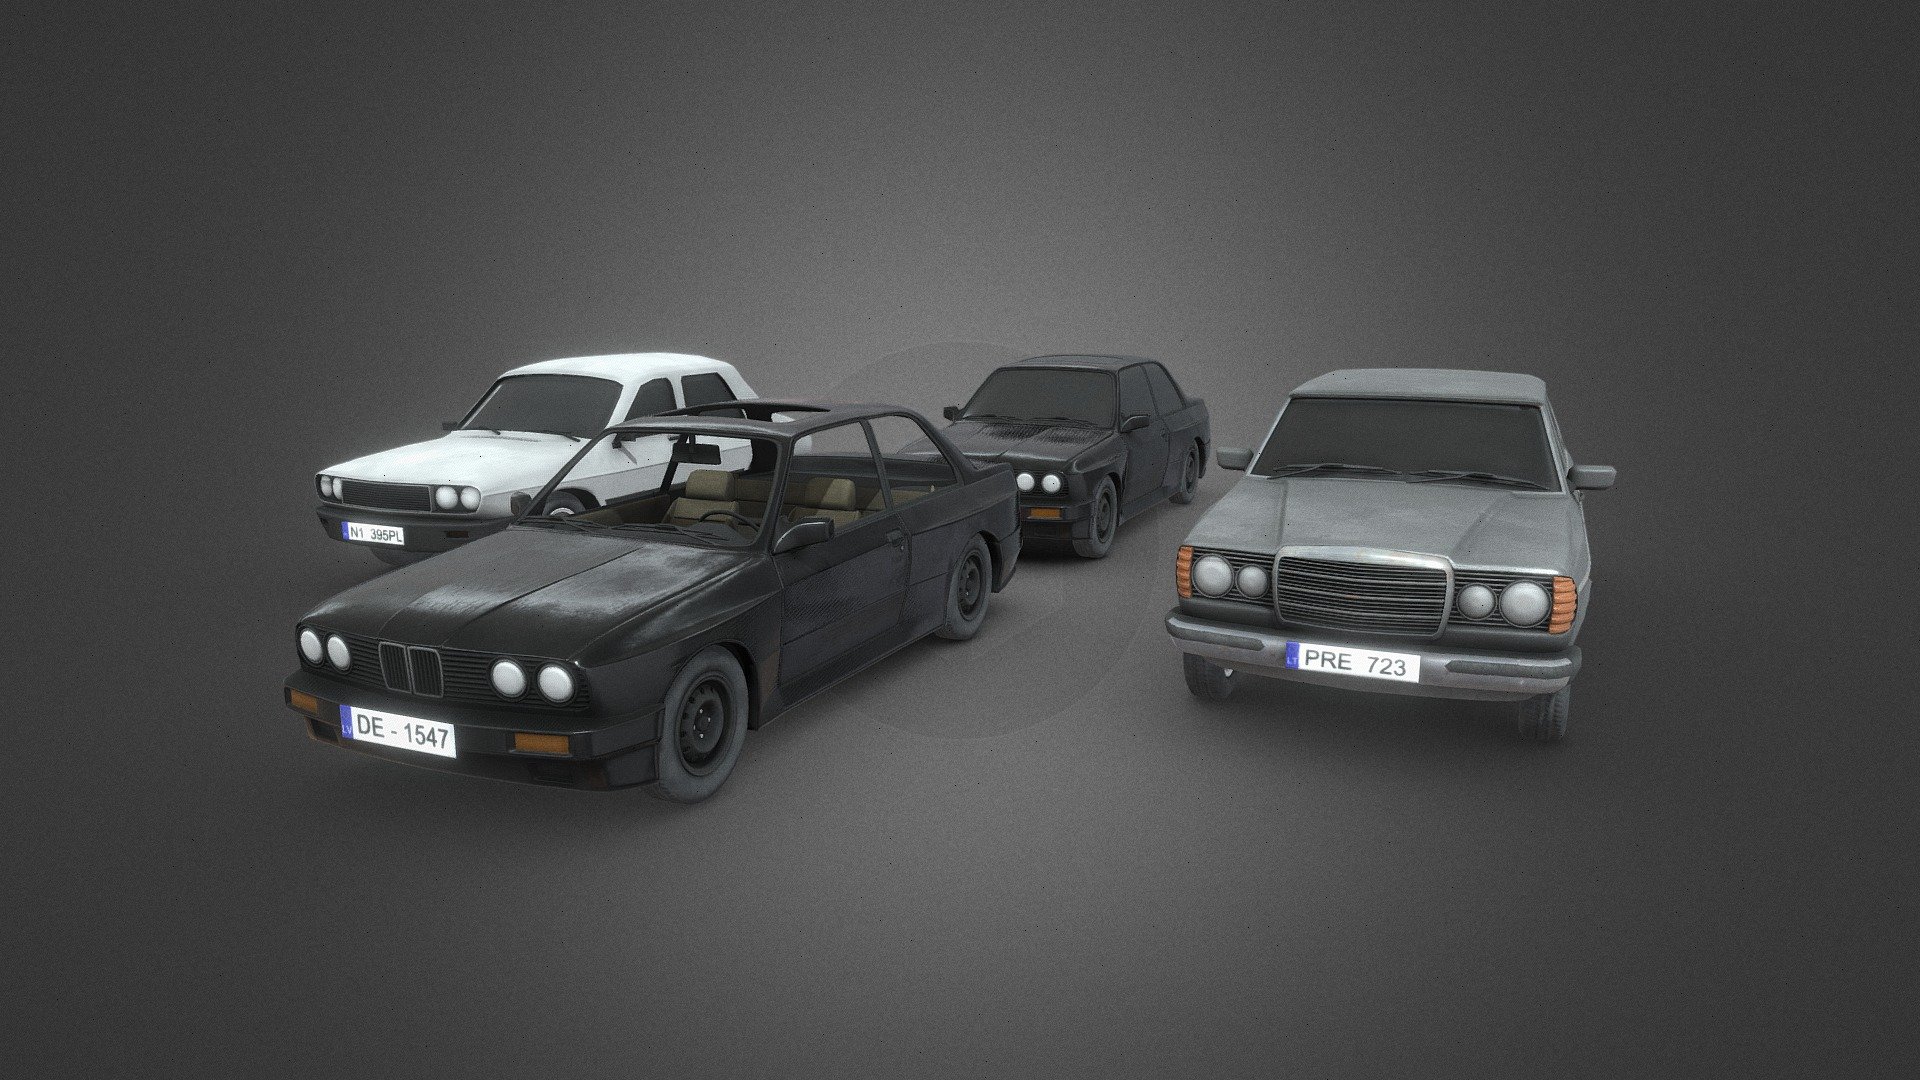 set of 3 cars, and in addition a car with a detailed interior. 

cars of the period of 80-90 years. 

possible in the future additions to the set.

набор из 3 машин, и в добавок машина с проработанным внутриннем салоном. 

машины периода 80-90 годов. 

возможны в будущием дополнения набора

I know how to use a translator, so everyone come in discord - https://discord.gg/hzwvJrwtqm

и славяно-арийская телега https://t.me/perdole1kurwa - Car Pack East 1 - Download Free 3D model by buh (@buh-late) 3d model